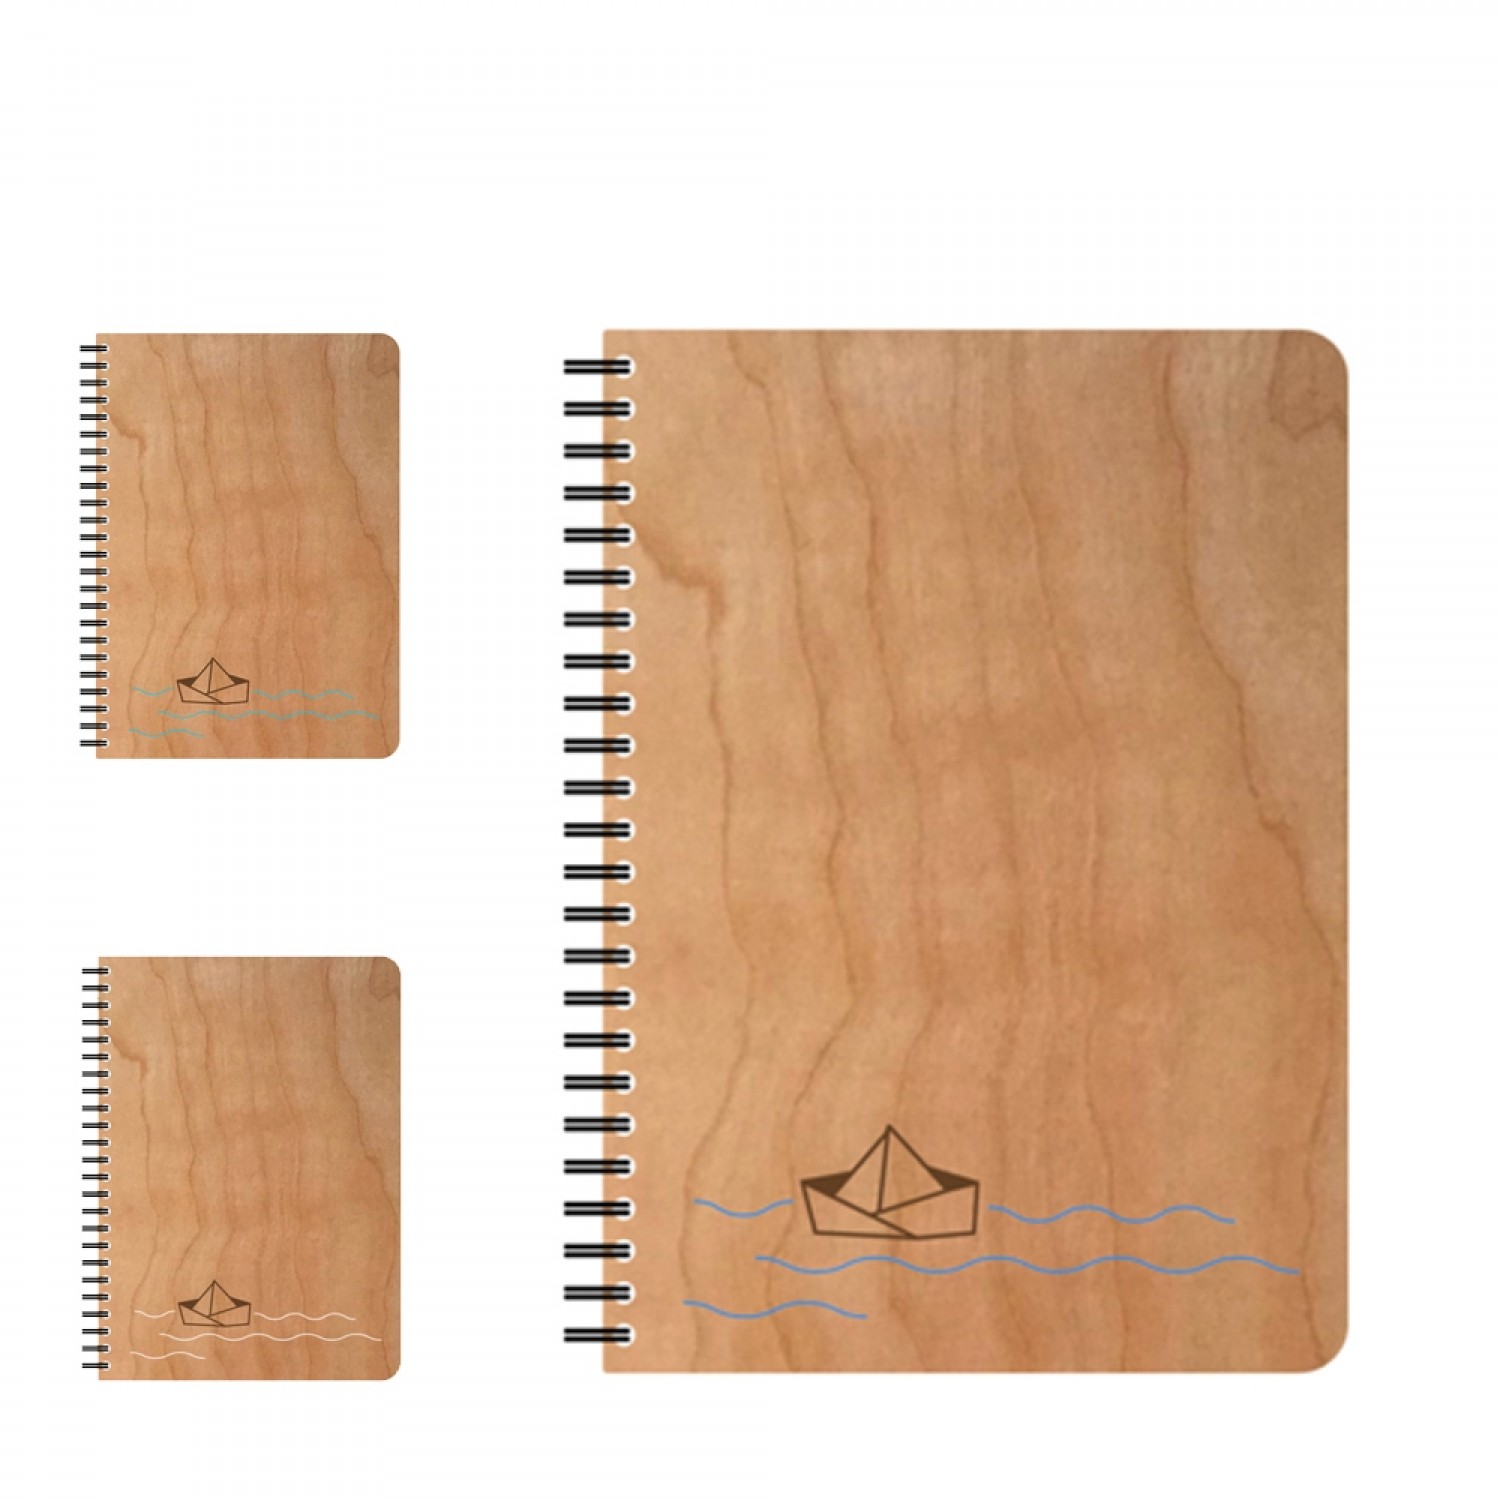 Refillable eco notebook PAPER BOAT in wooden cover | echtholz